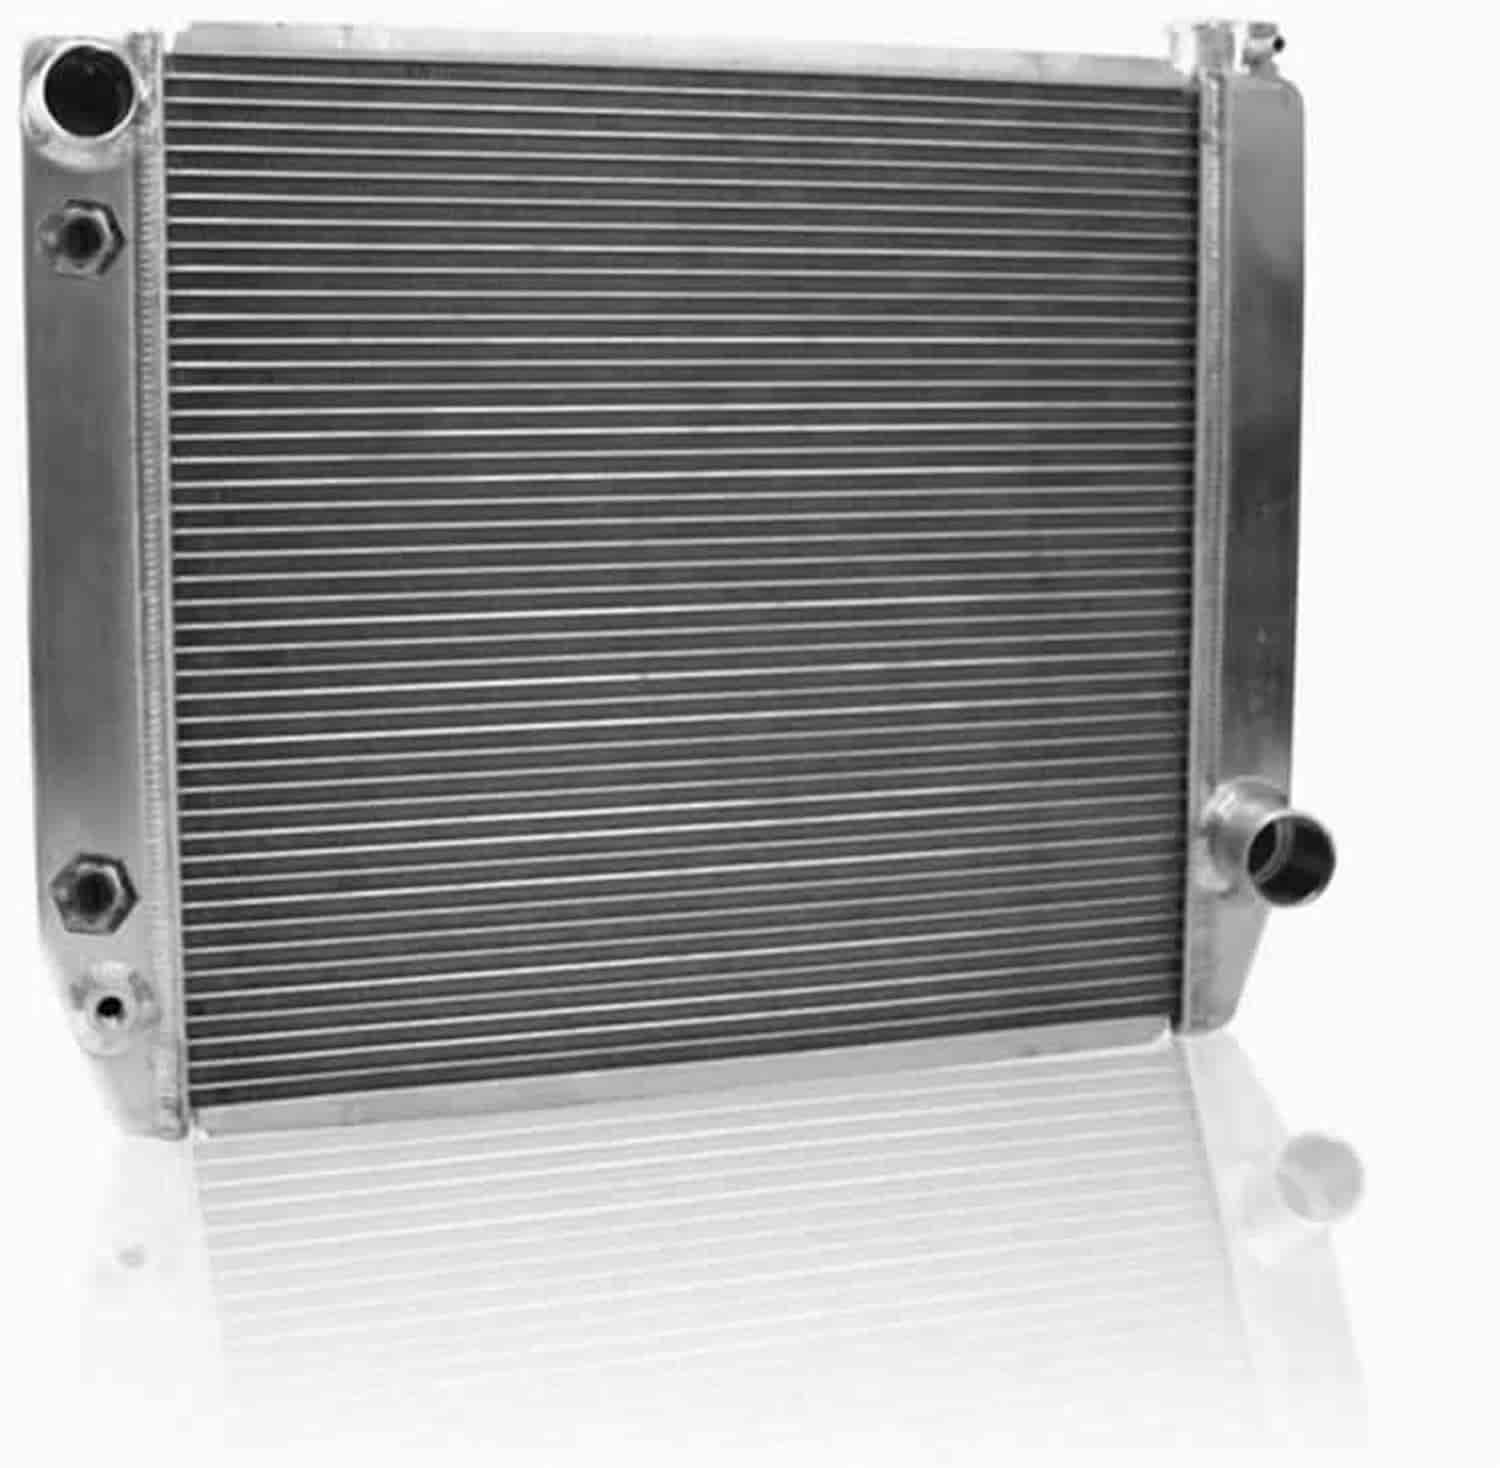 ClassicCool Universal Fit Radiator Single Pass Crossflow Design 24" x 19" with Transmission Cooler